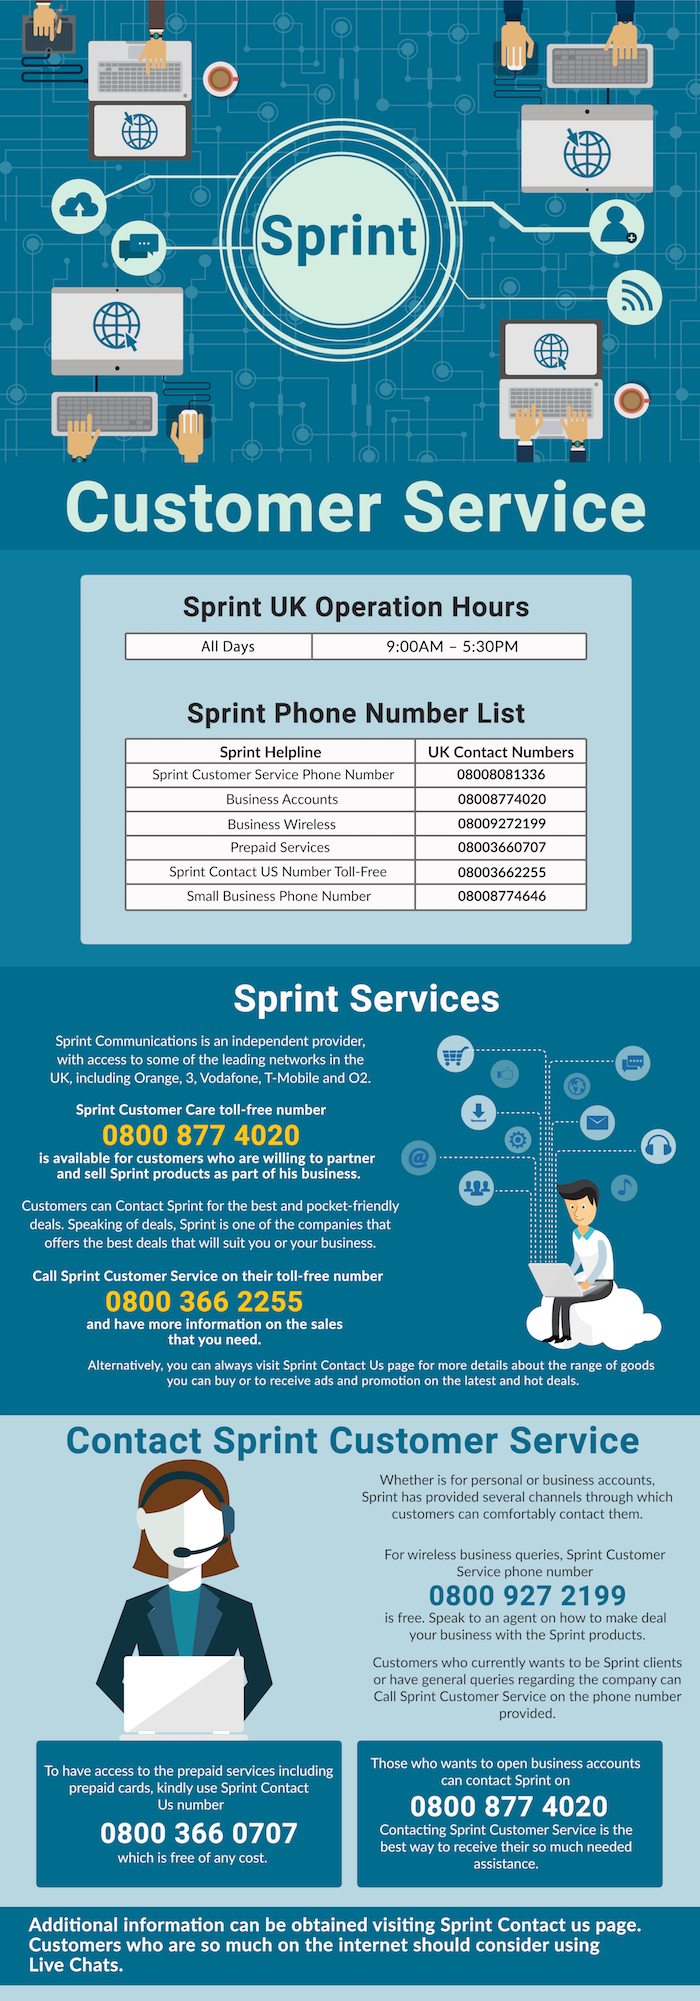 Sprint Service Phone Number - Direct Call on 0844 3069185